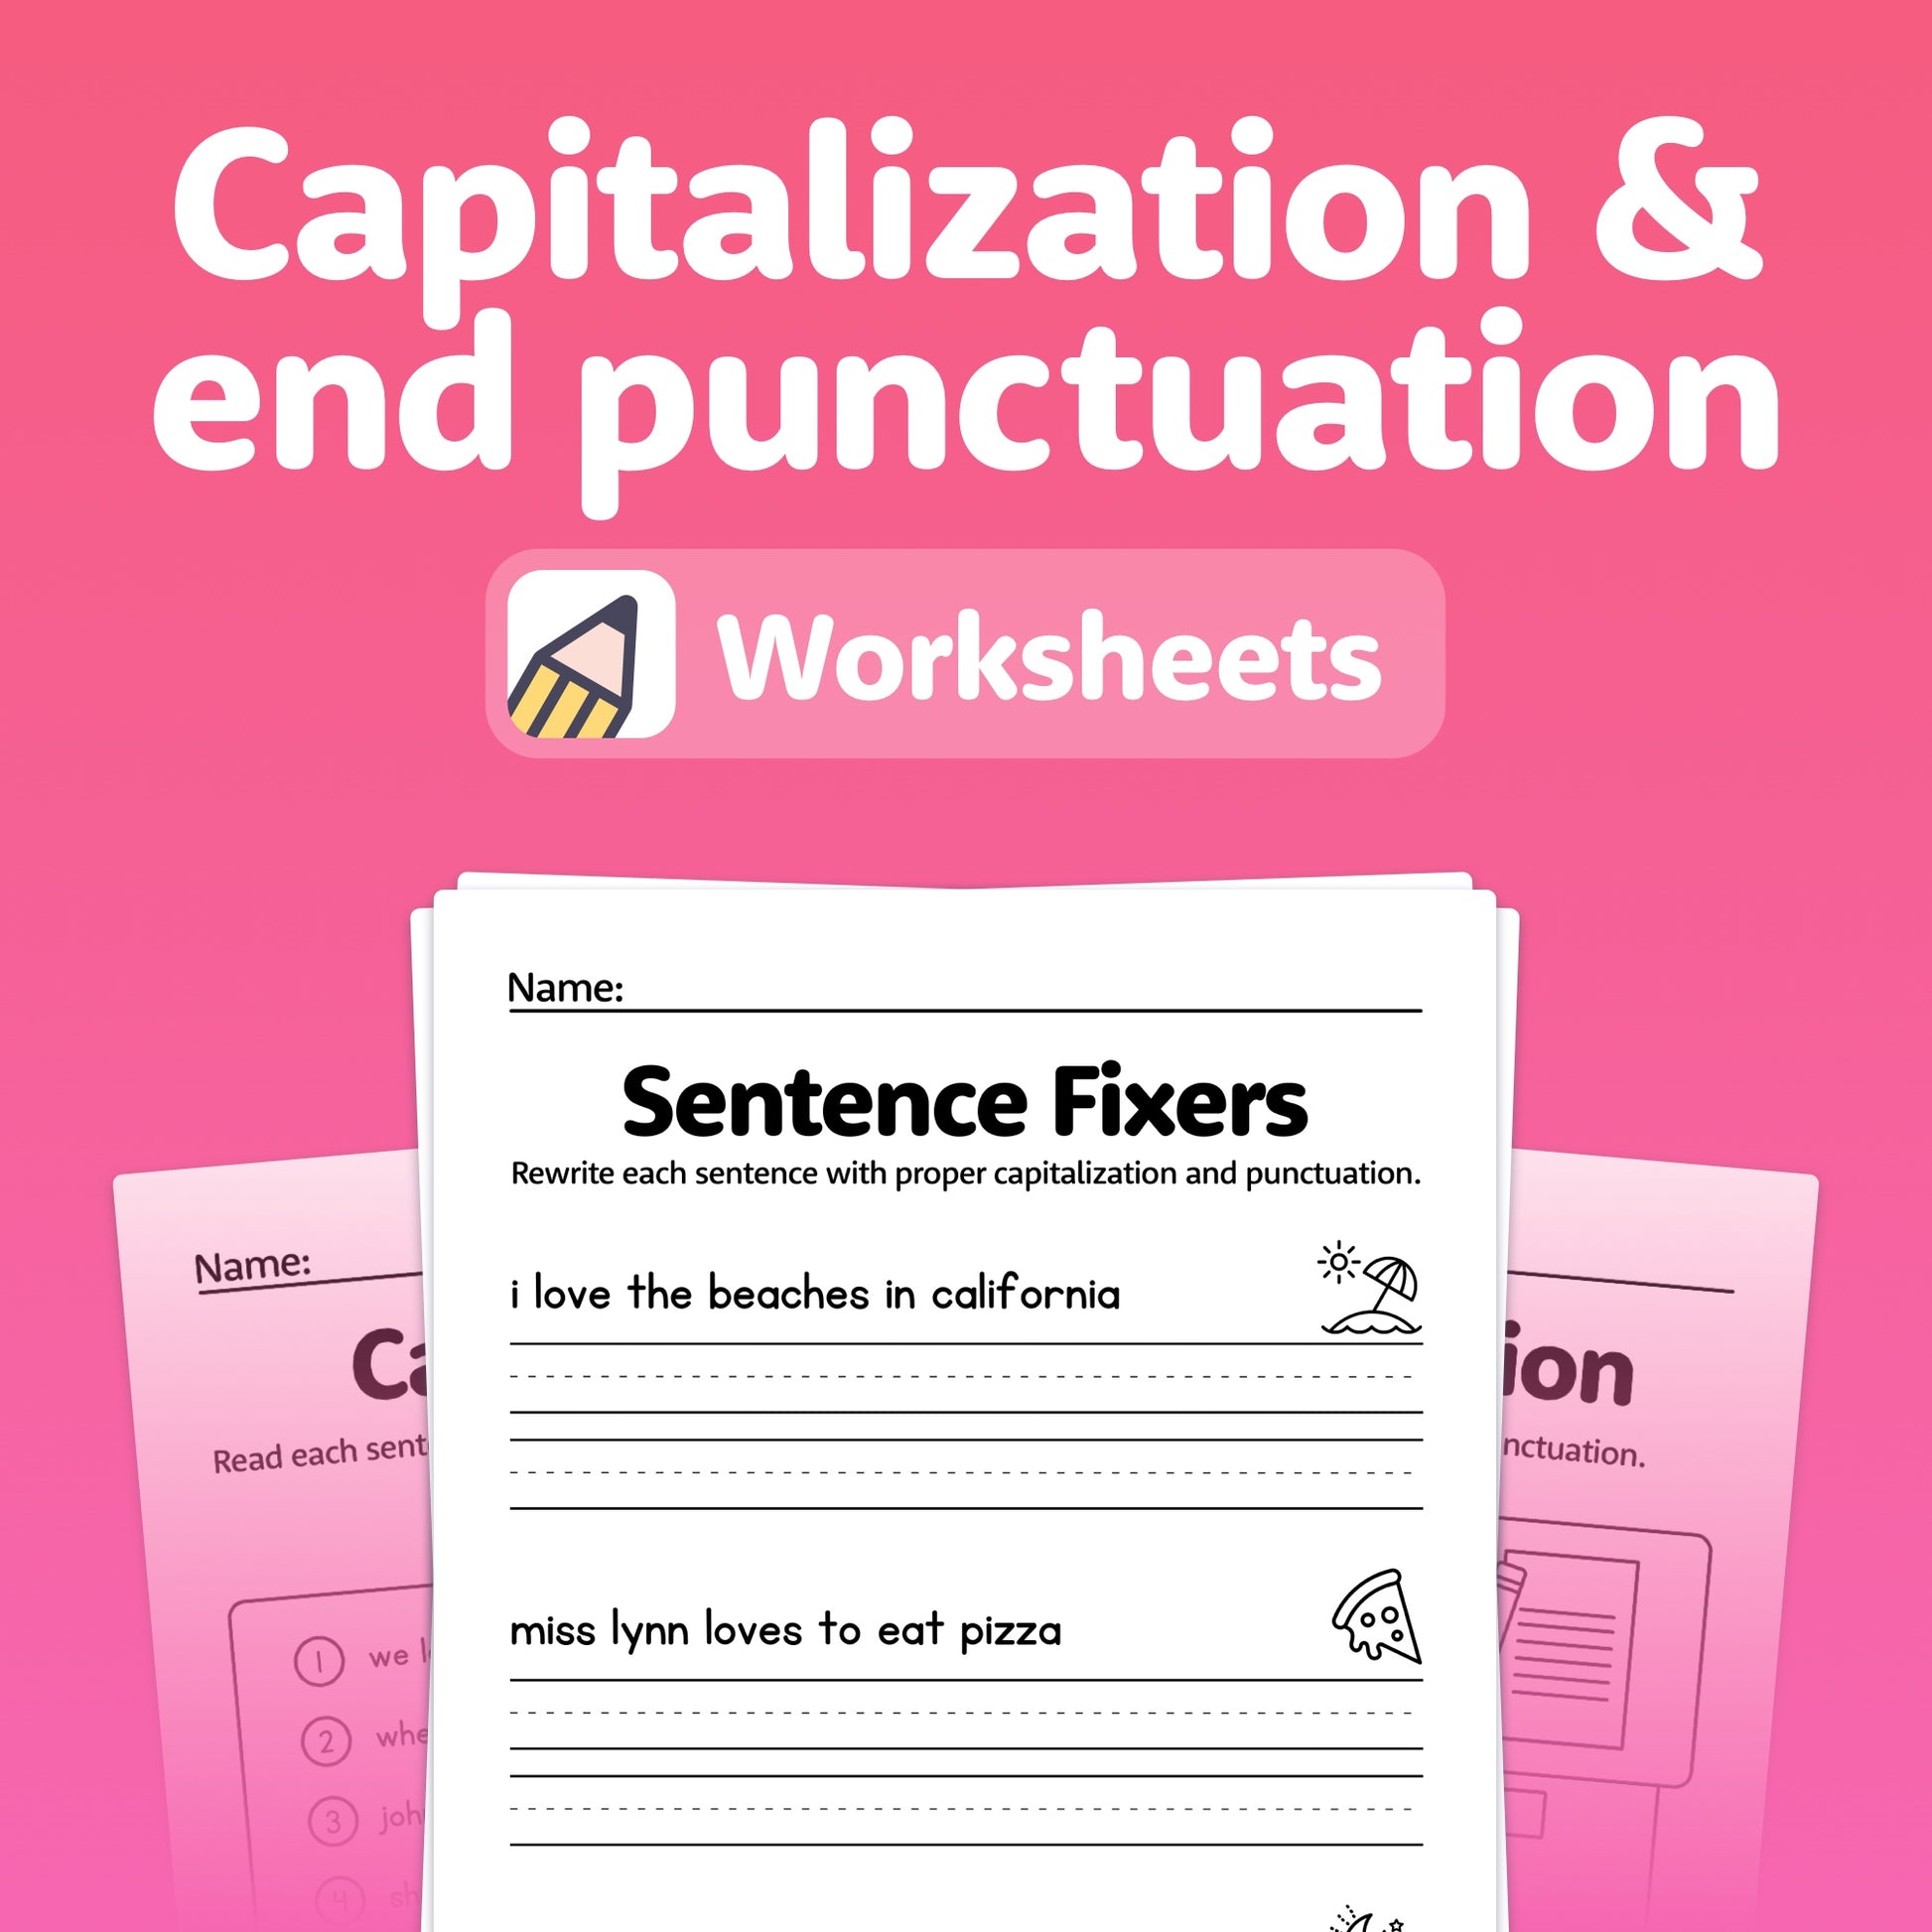 Capitalization and end punctuation worksheets